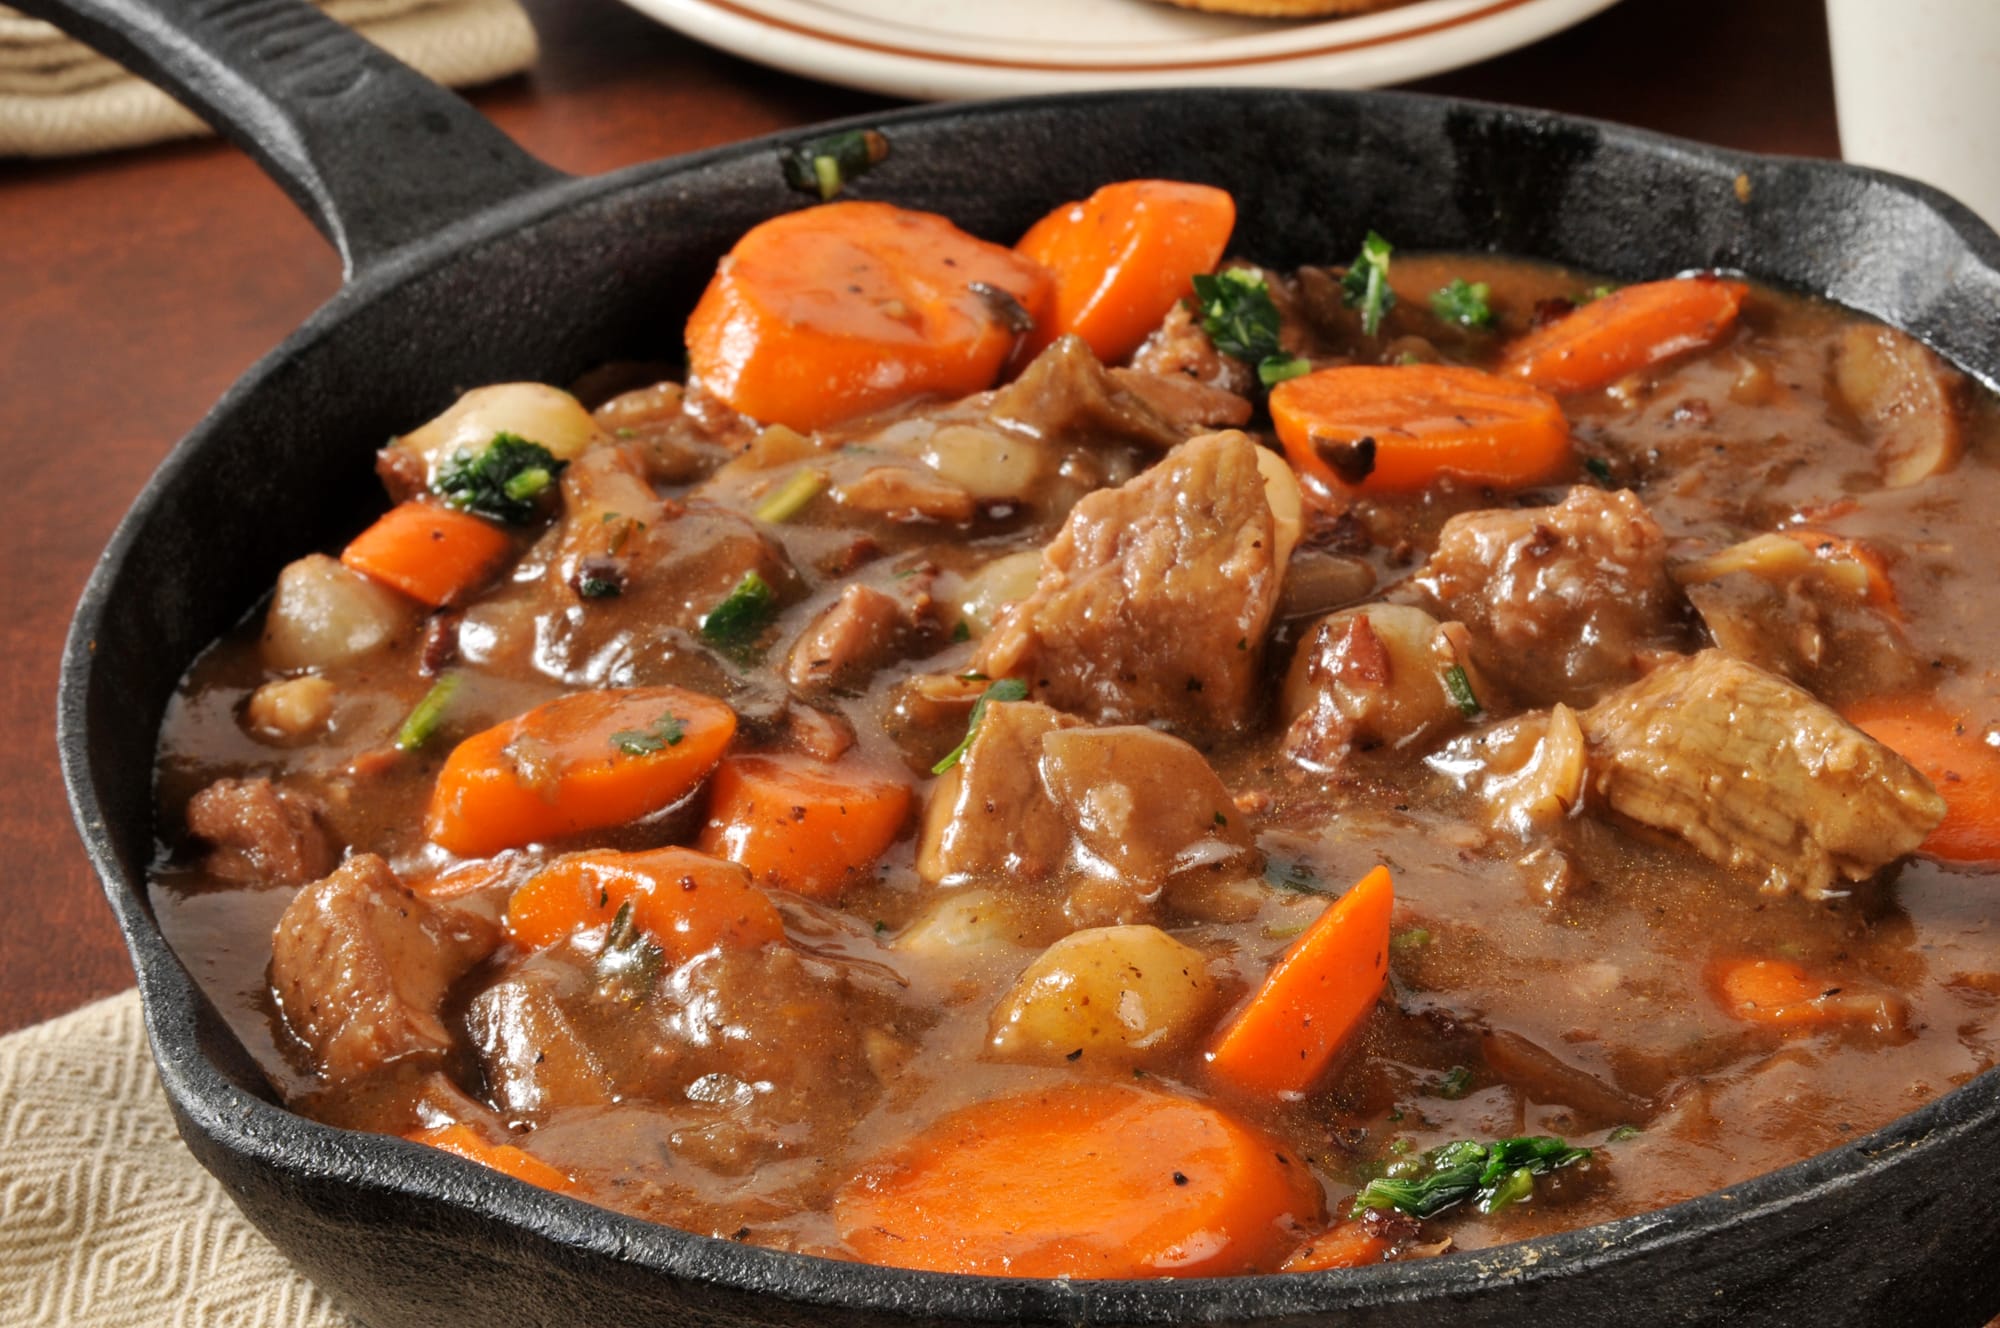 Portuguese Beef and Red Wine Stew